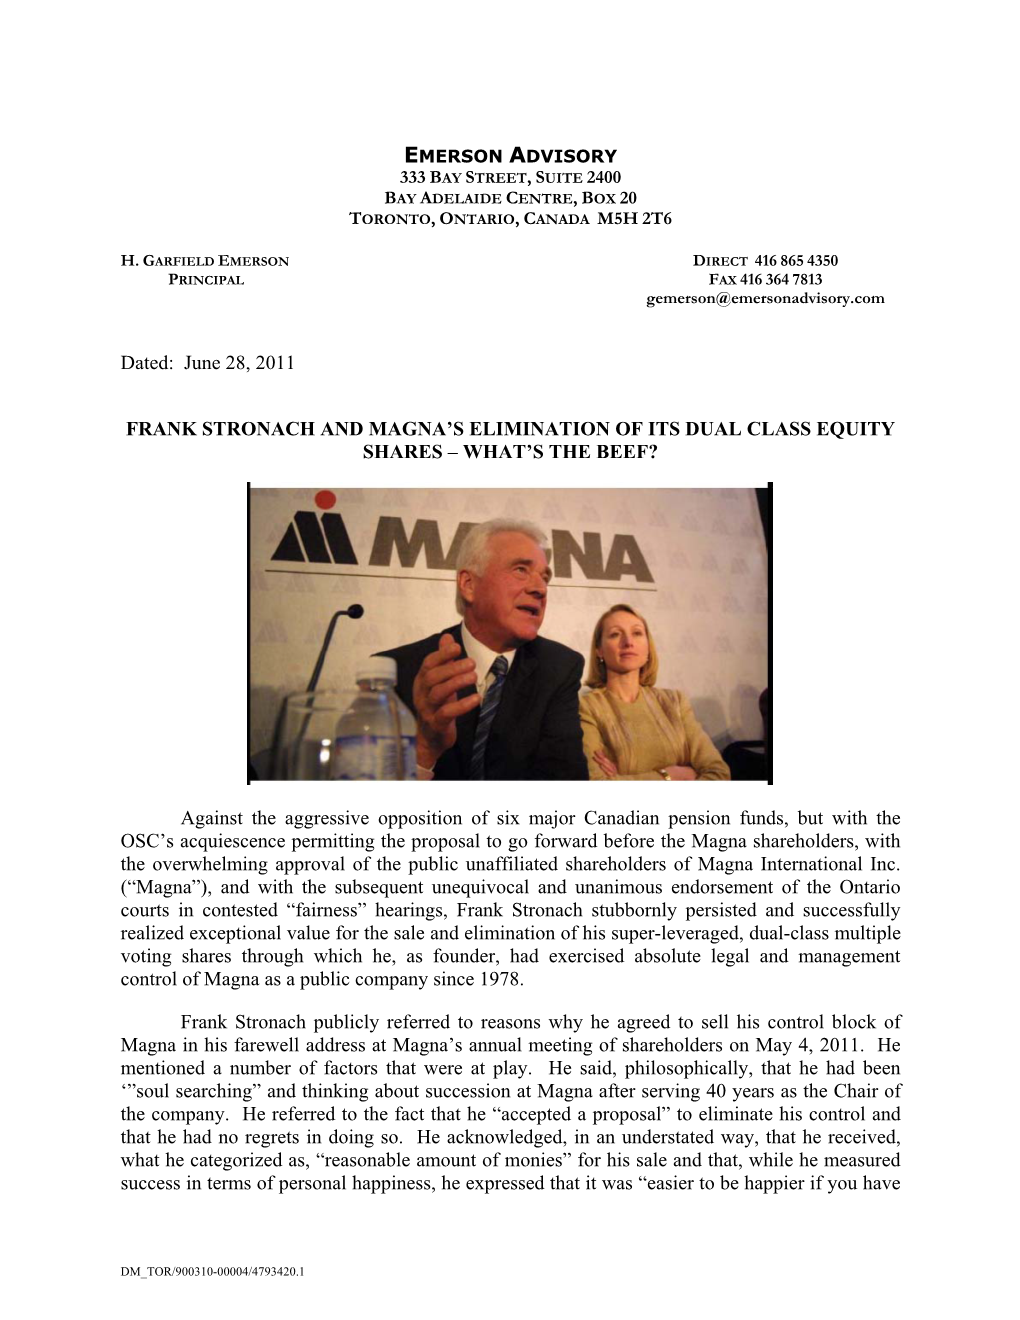 Dated: June 28, 2011 FRANK STRONACH and MAGNA's